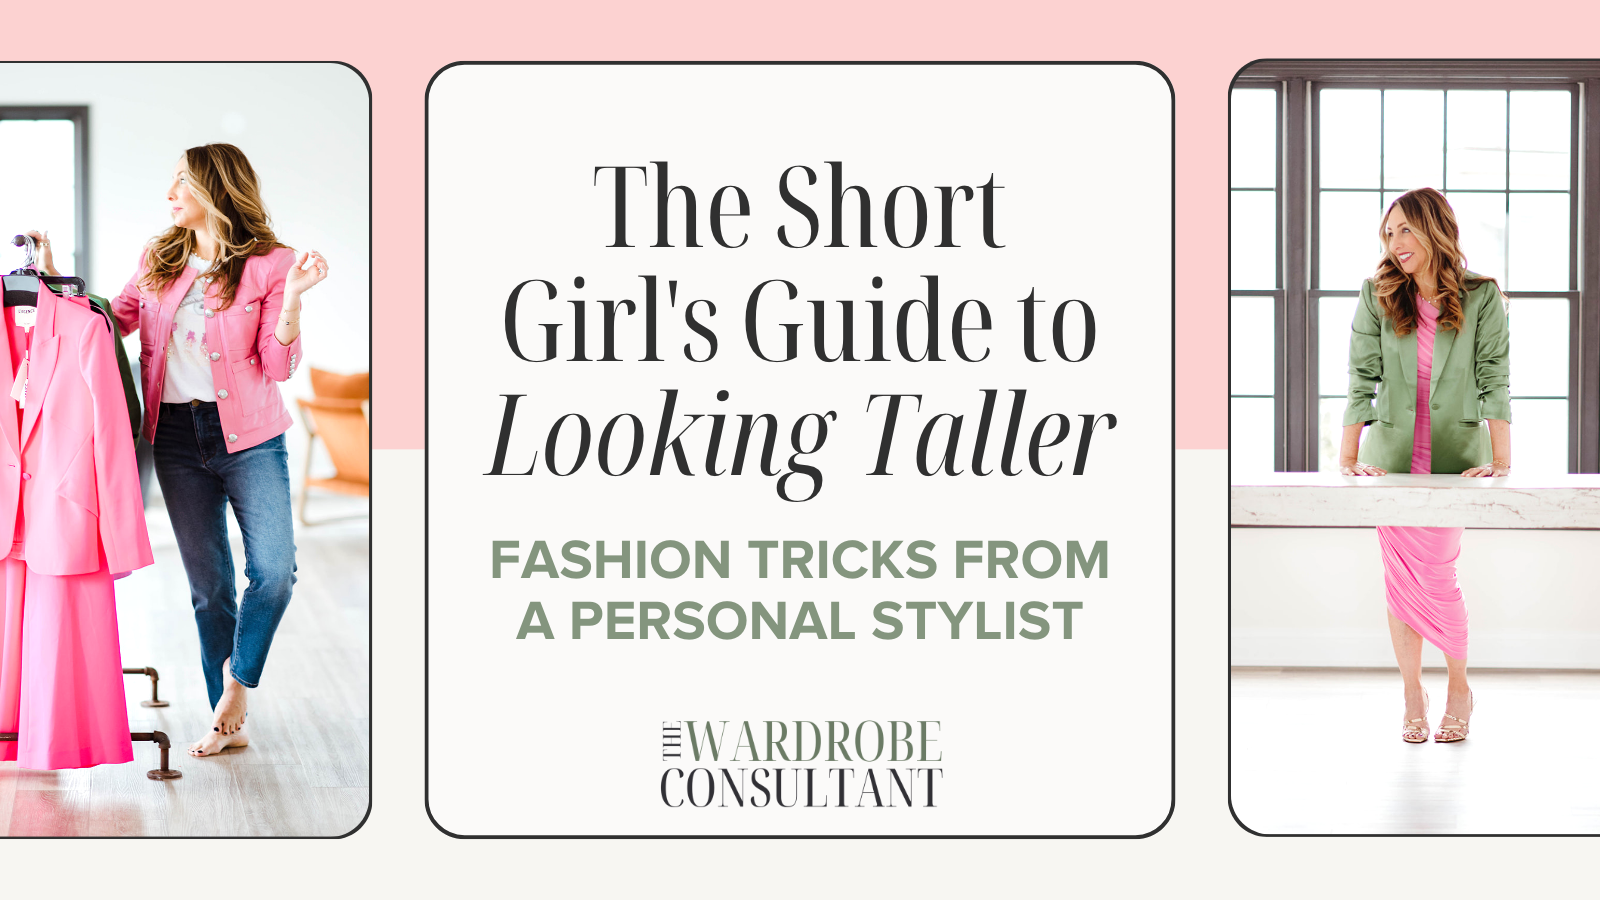 The Short Girl's Guide to Looking Taller: Fashion Tricks from a